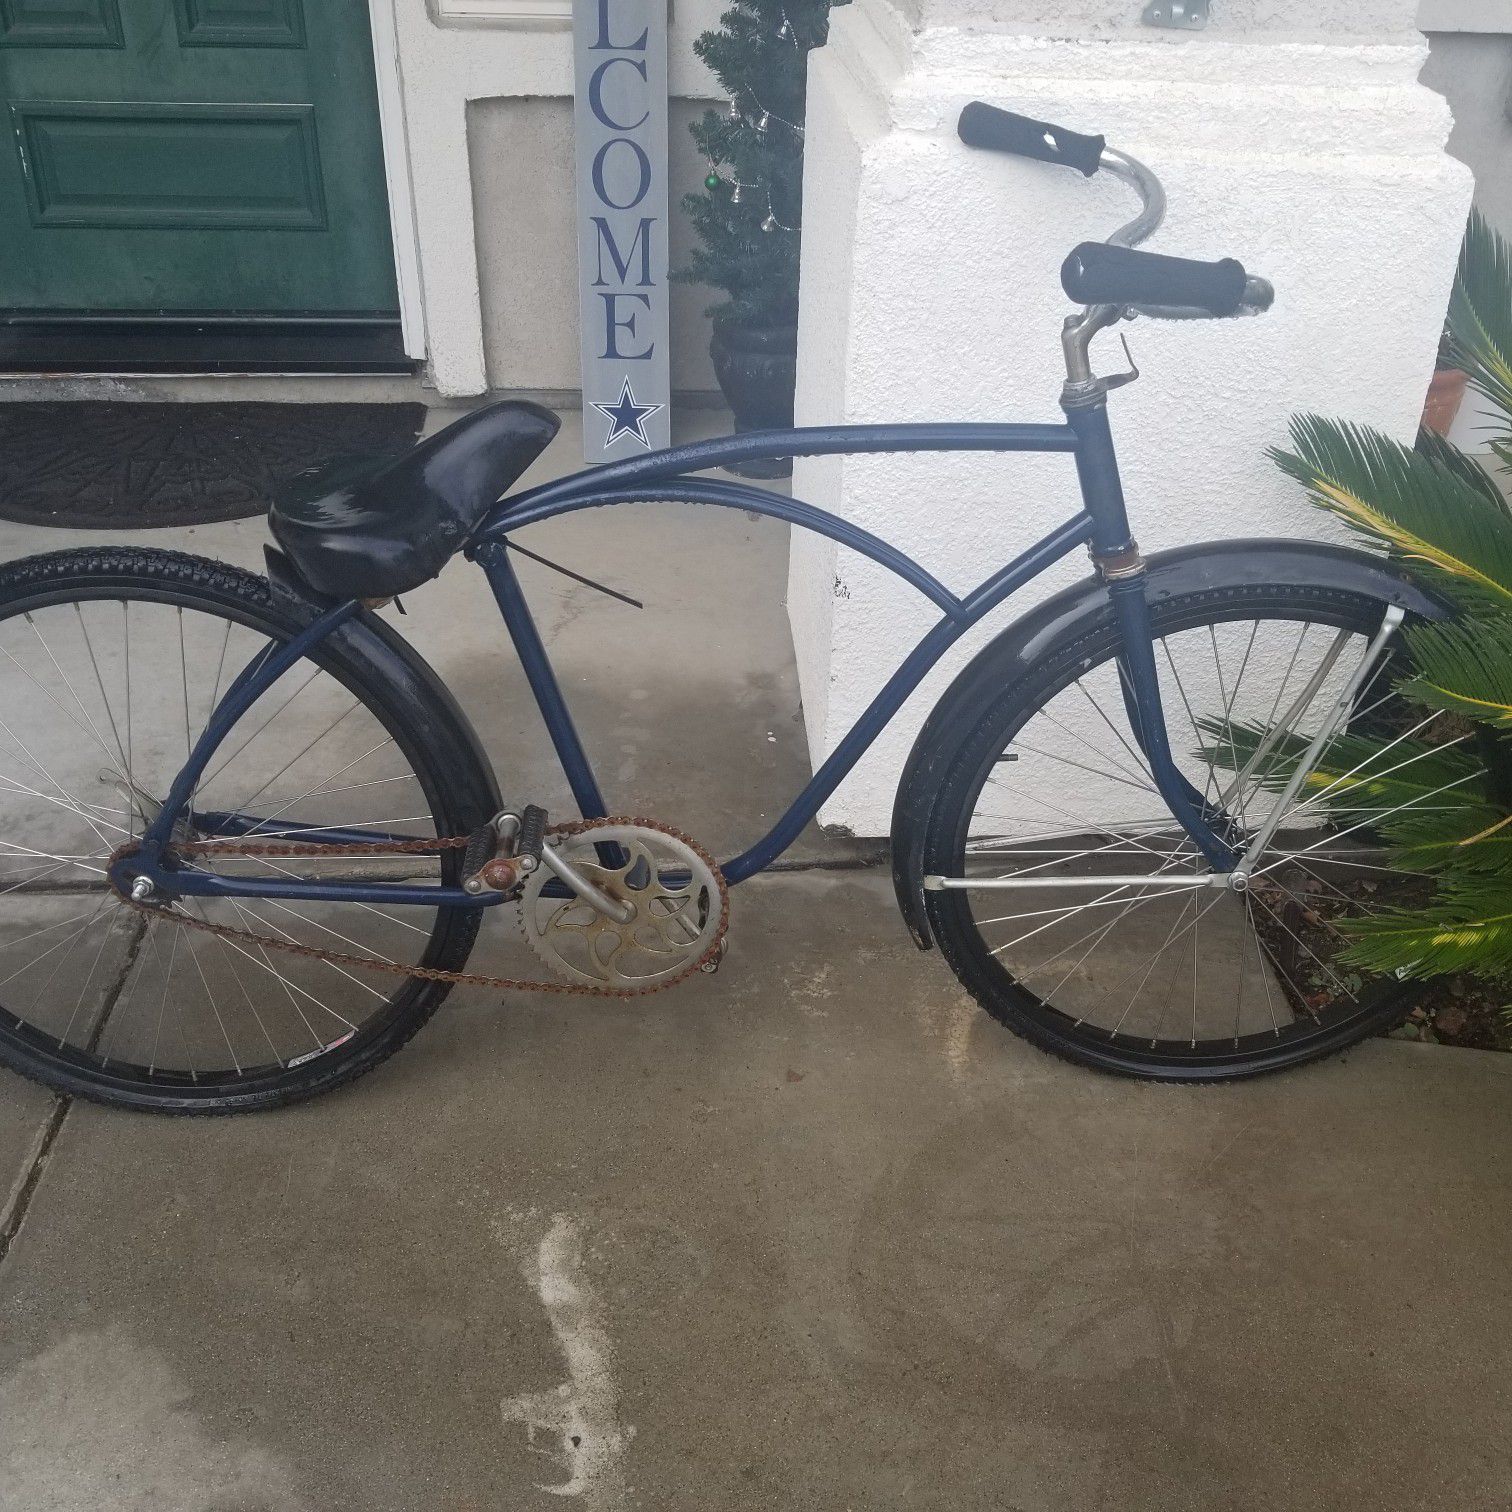 Trade bike for 26" lowrider bike wheel and tires or lowrider bike parts